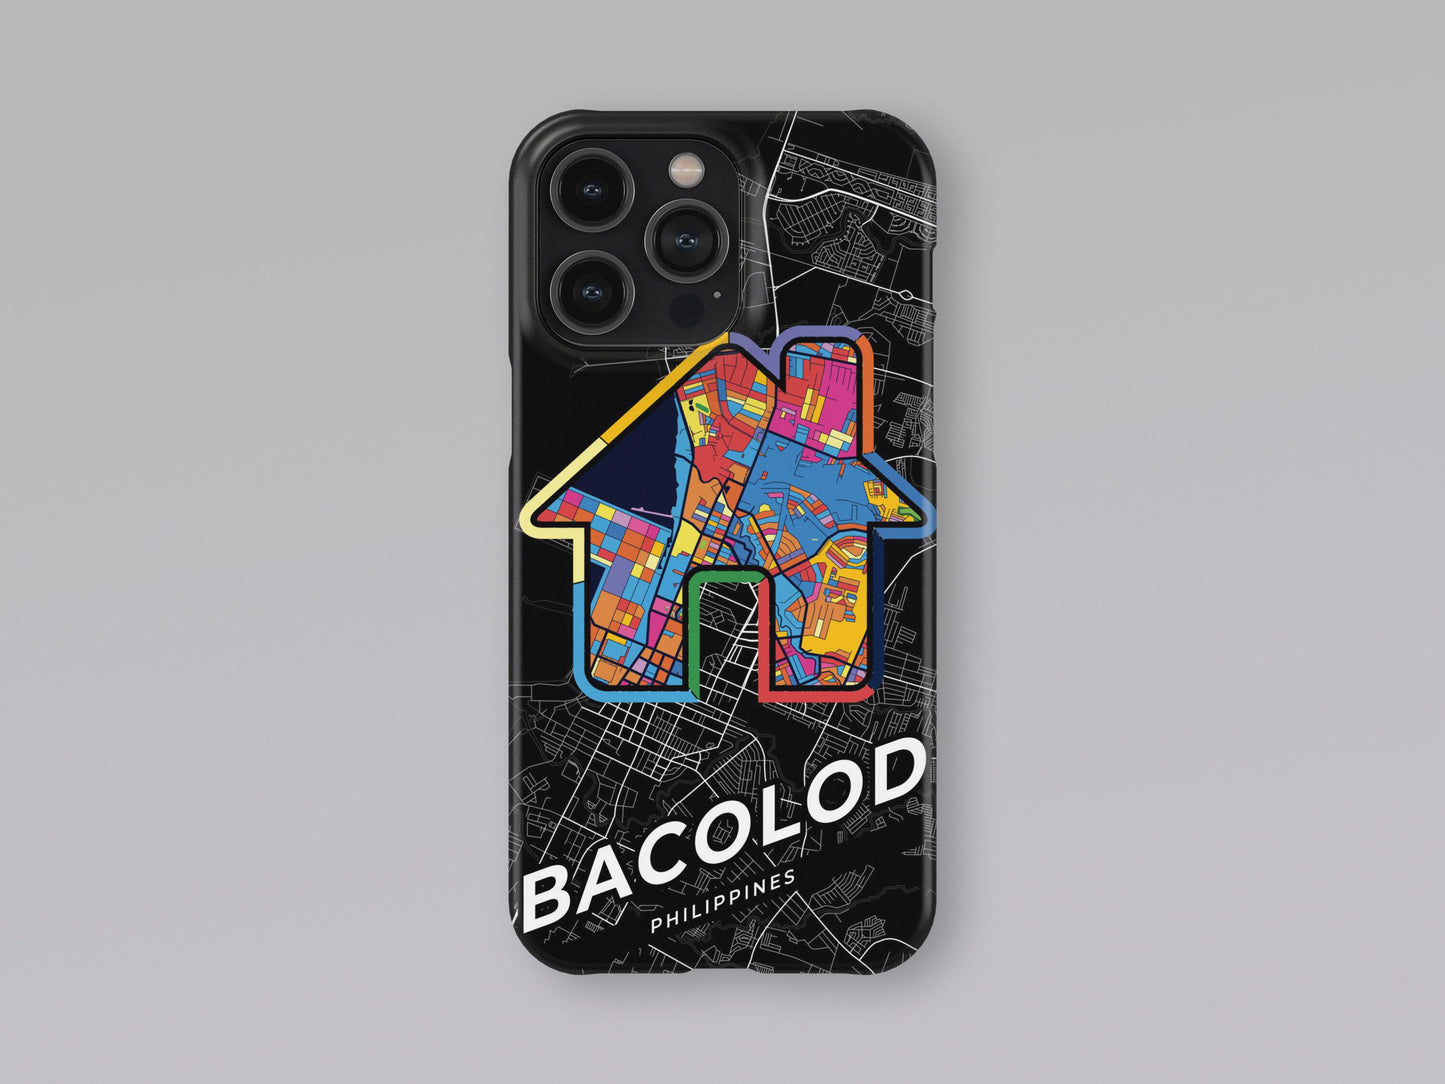 Bacolod Philippines slim phone case with colorful icon. Birthday, wedding or housewarming gift. Couple match cases. 3